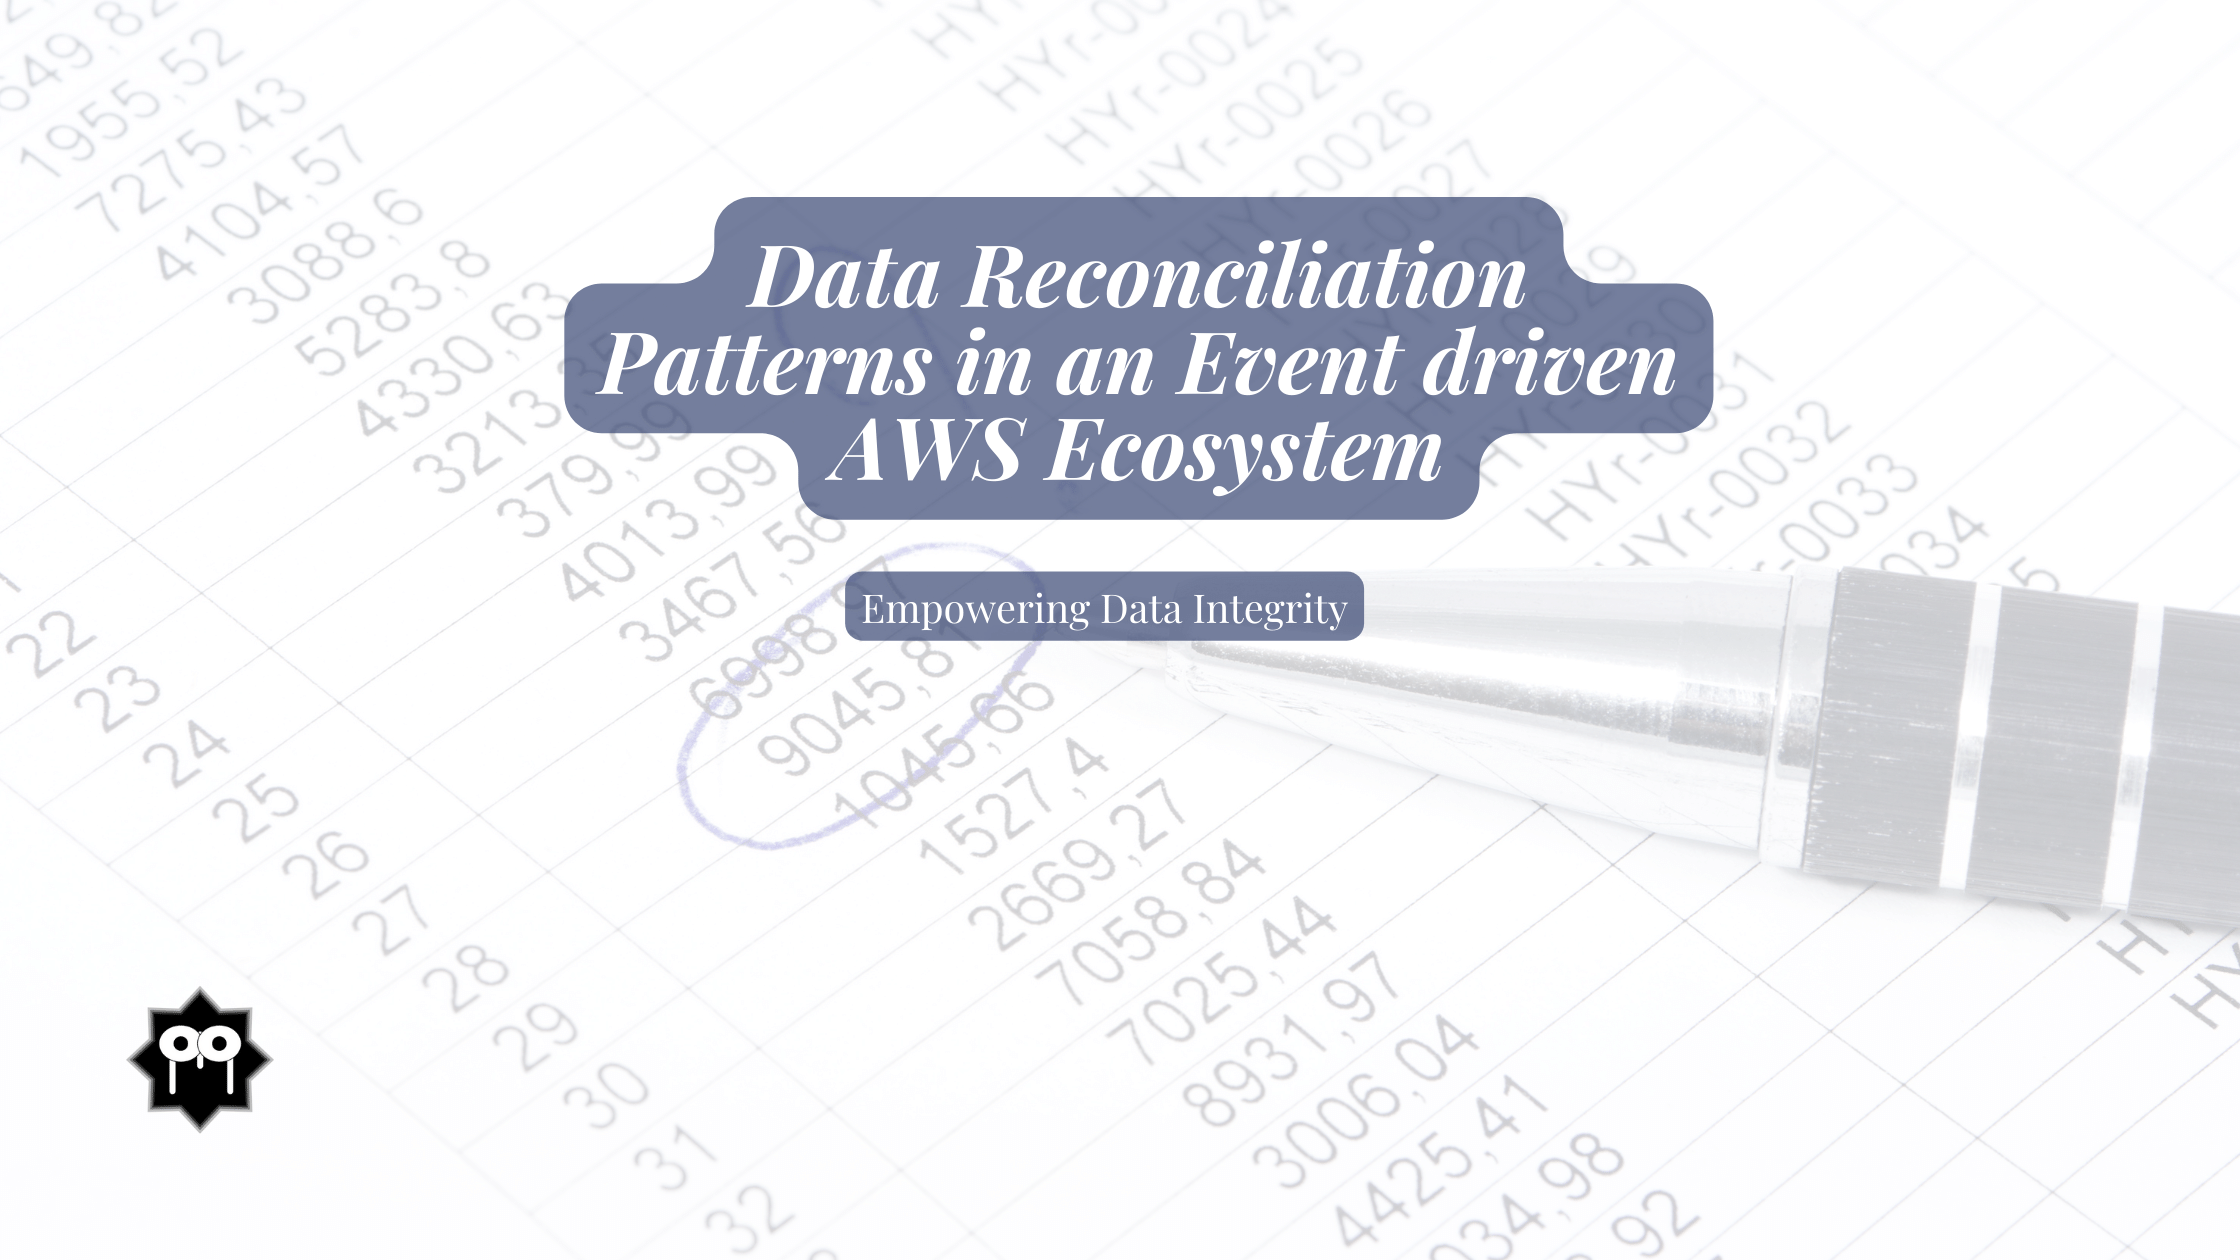 Data Reconciliation Patterns in an Event driven AWS Ecosystem